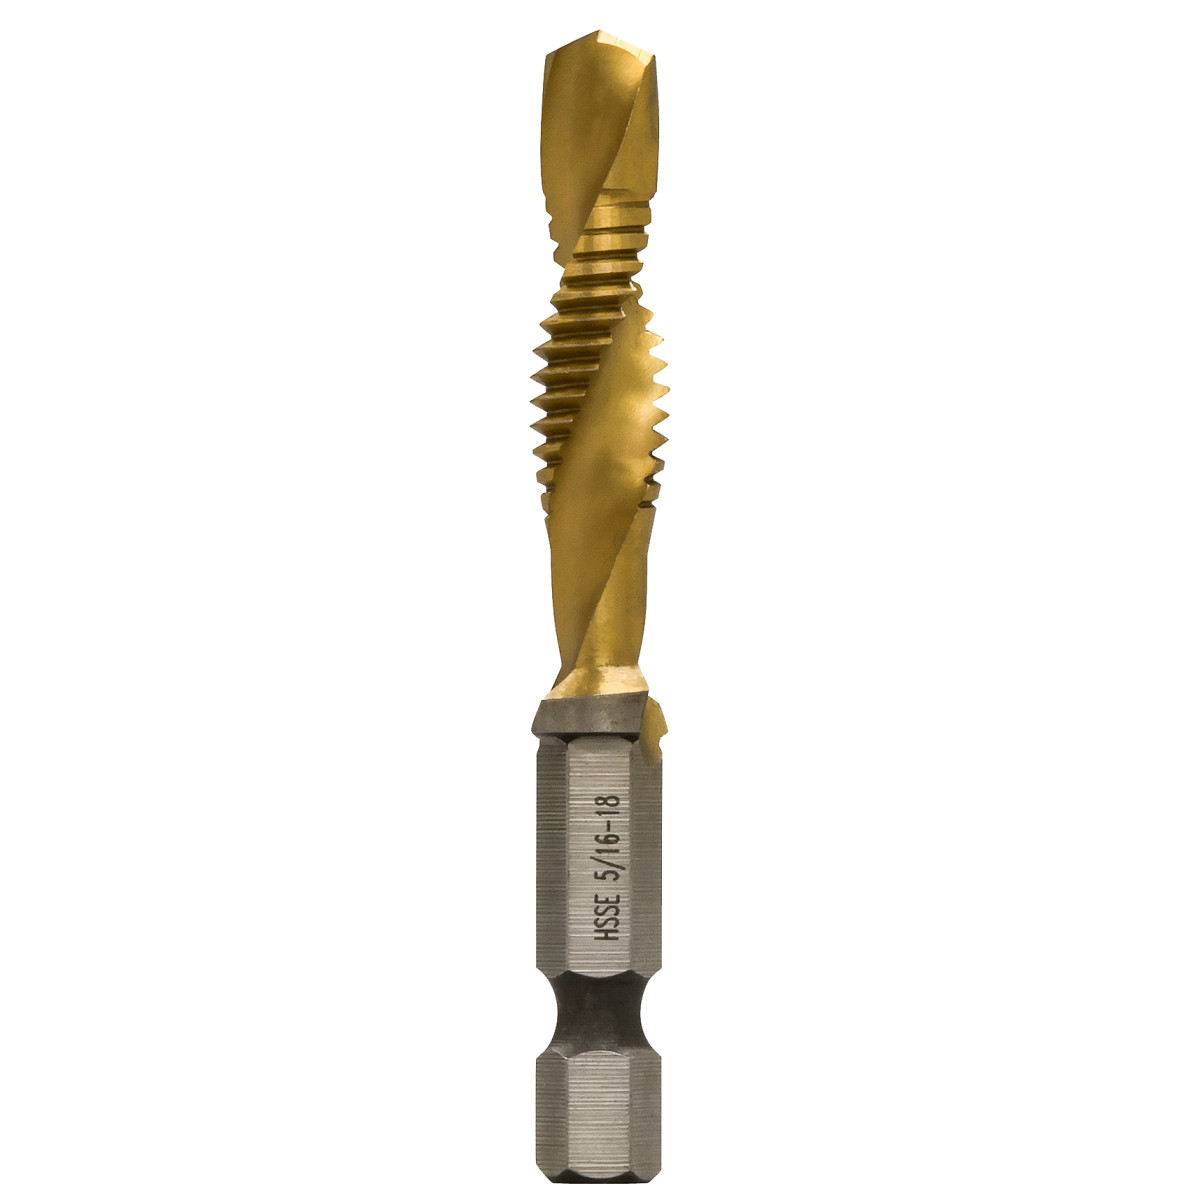 5/16-18 Split-point tip resists walking and penetrates material faster. Strong, high-speed steel provides superior resistance to heat and abrasion. Titanium Nitride coating ensures that the bits run cooler, drill faster, and last longer. Optimized core for significantly reduced torque on the user and extended tool life. Designed to drill in up to 1/4